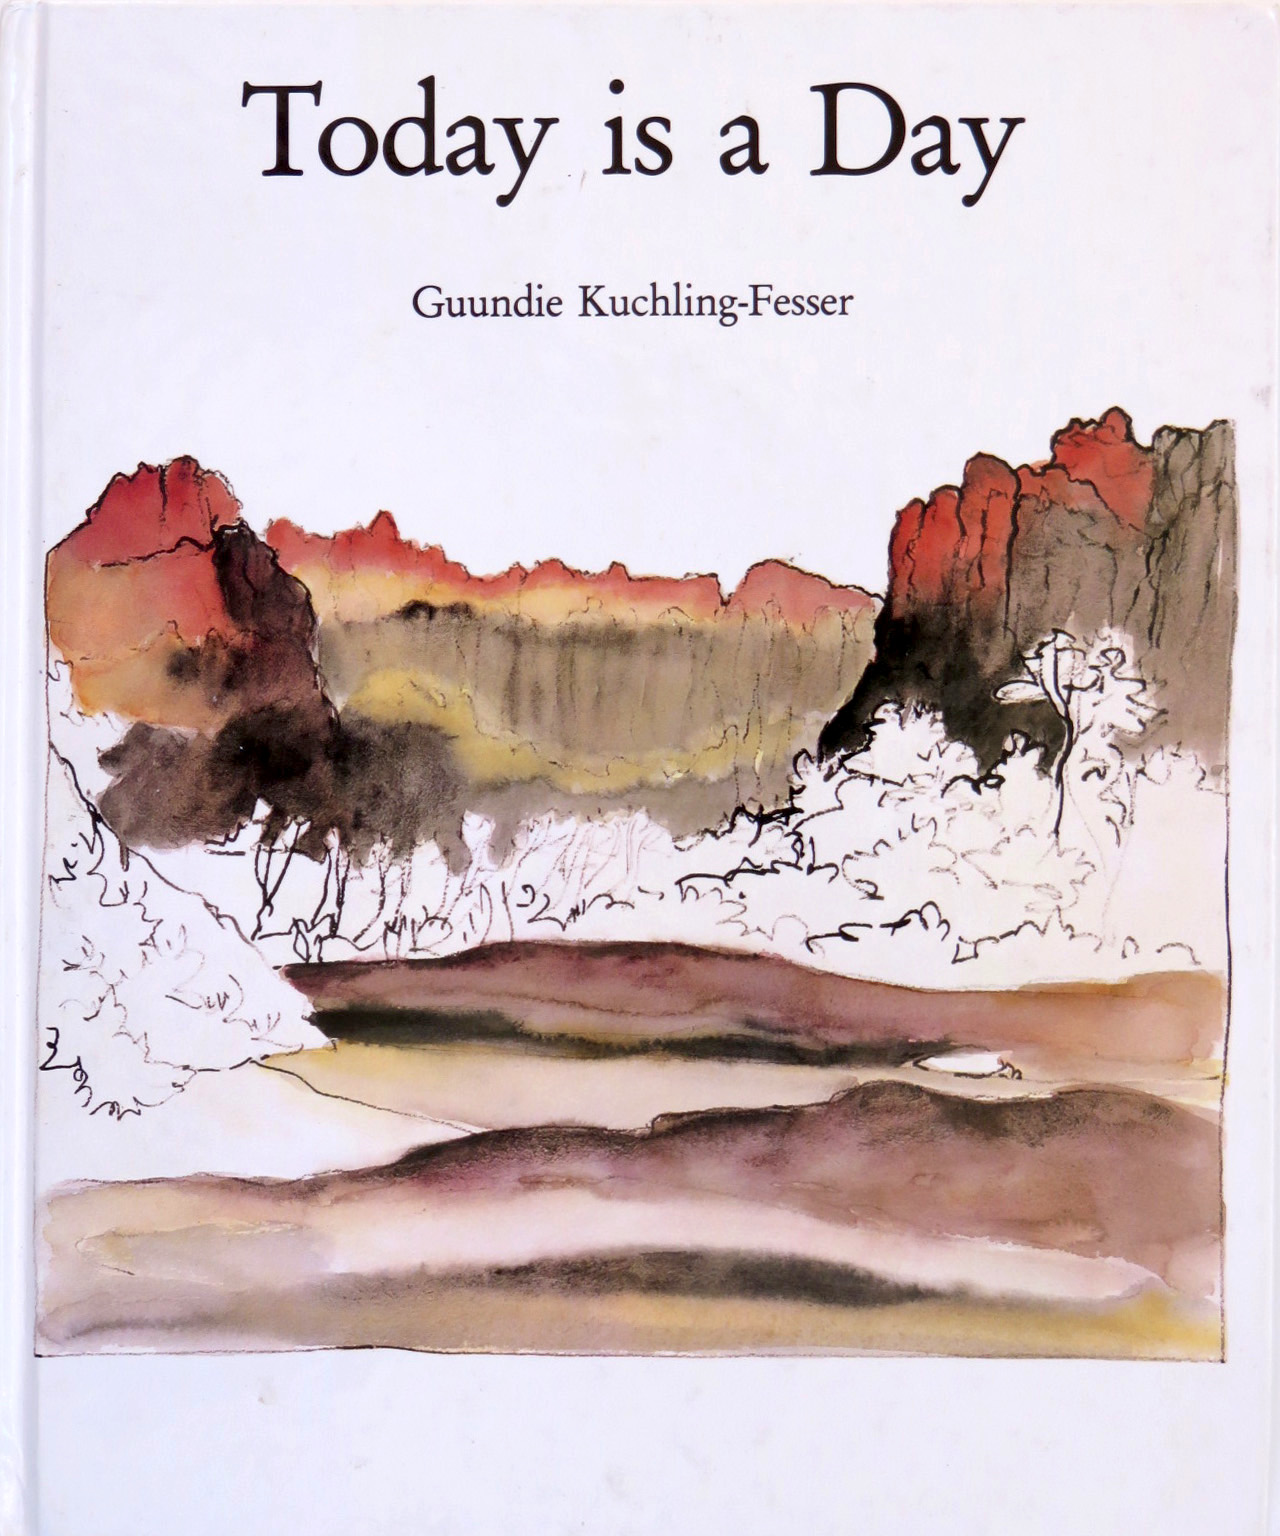 Today is a Day by Guundie Kuchling, Artist and Writer